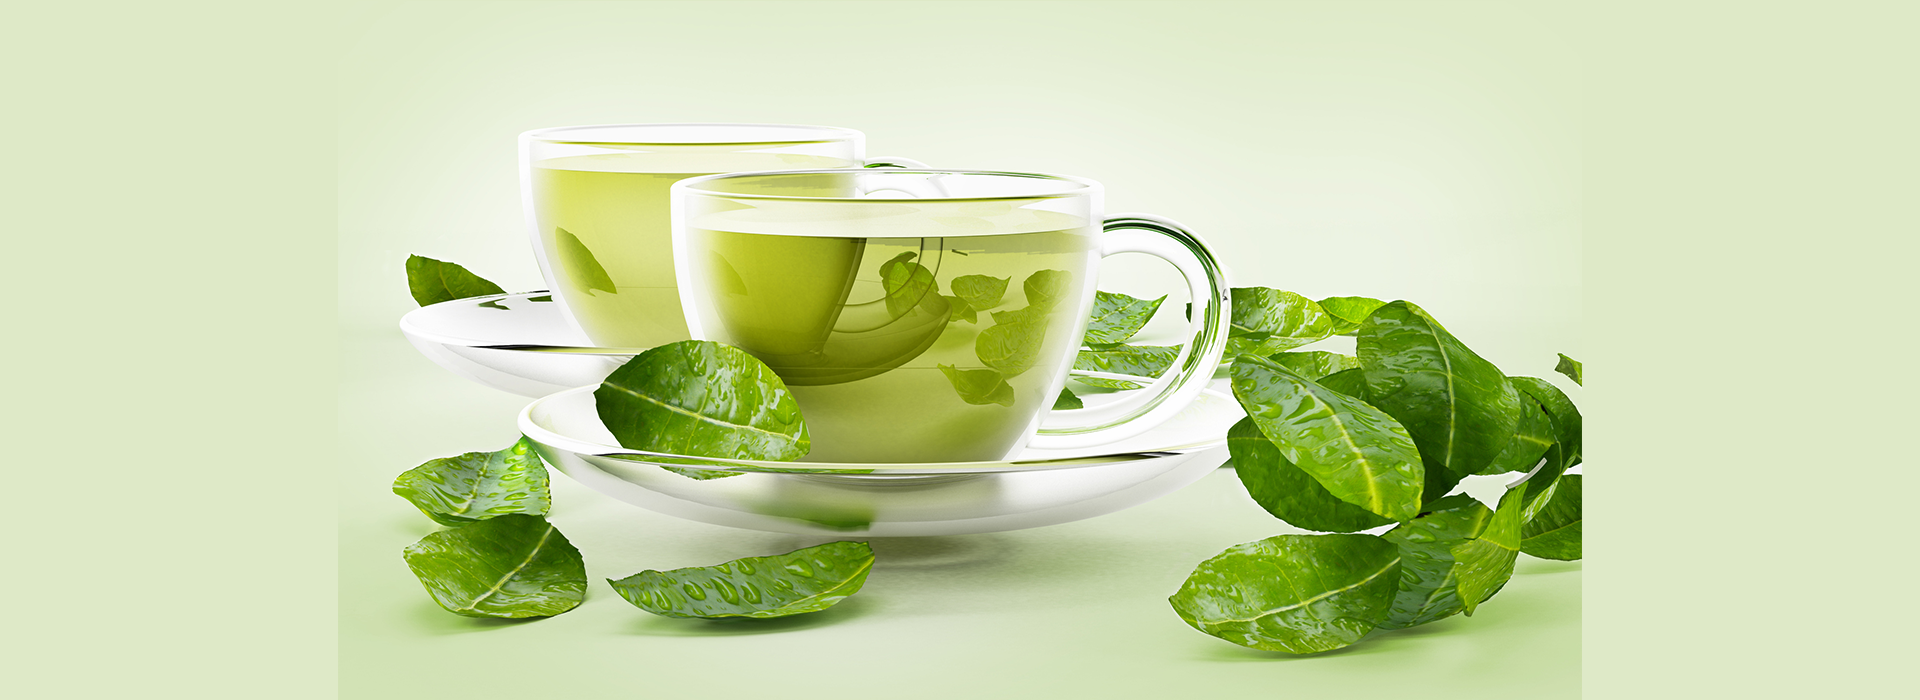 Does Drinking Green Tea Helps In Losing Weight?